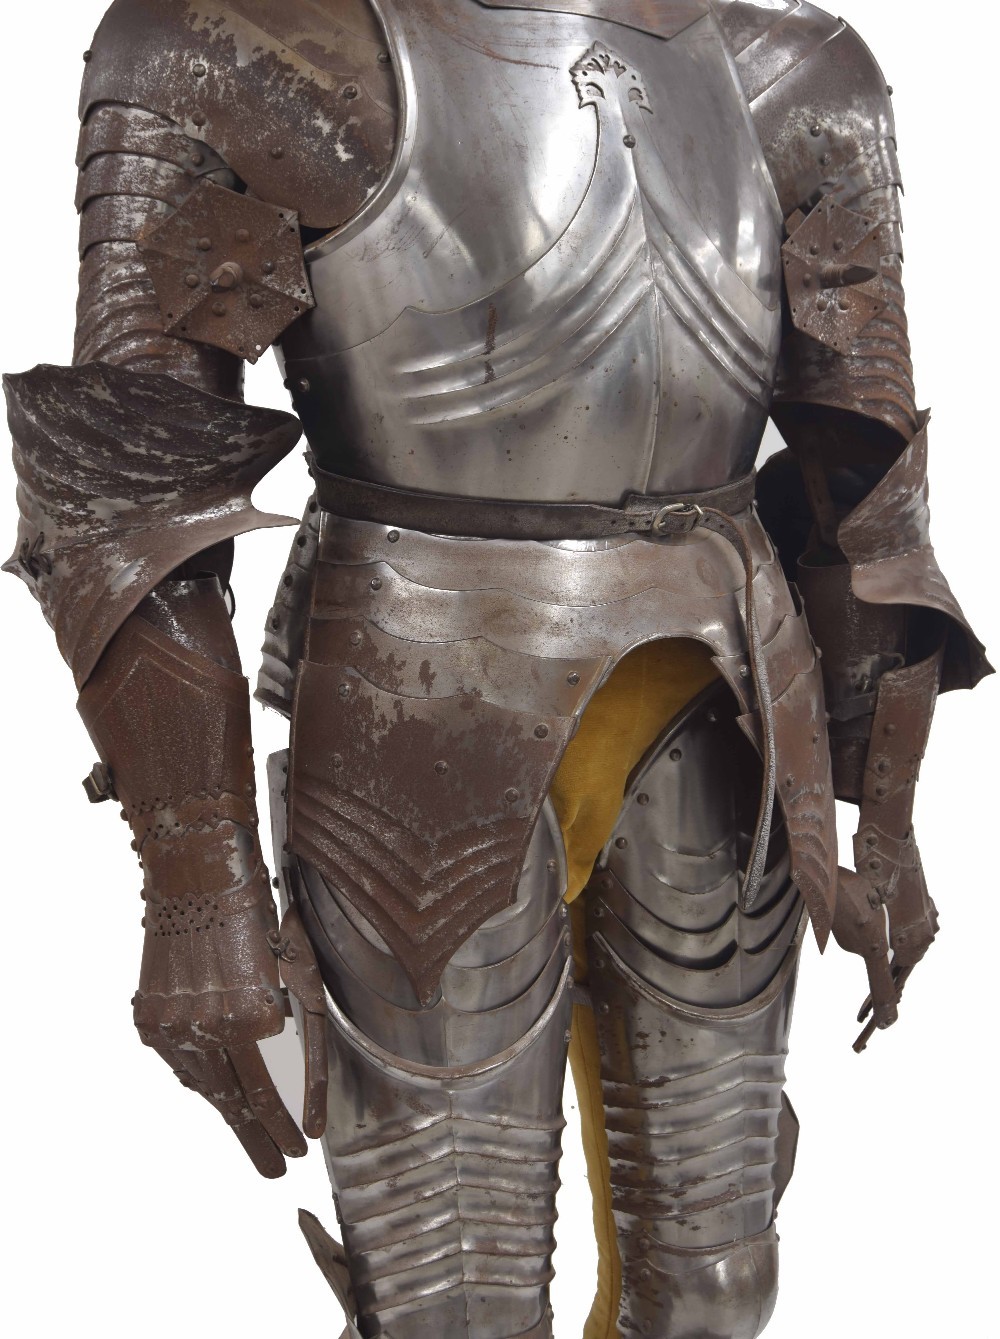 Full suit of German ceremonial steel armour for horseback in the Medieval style, including a - Image 3 of 6